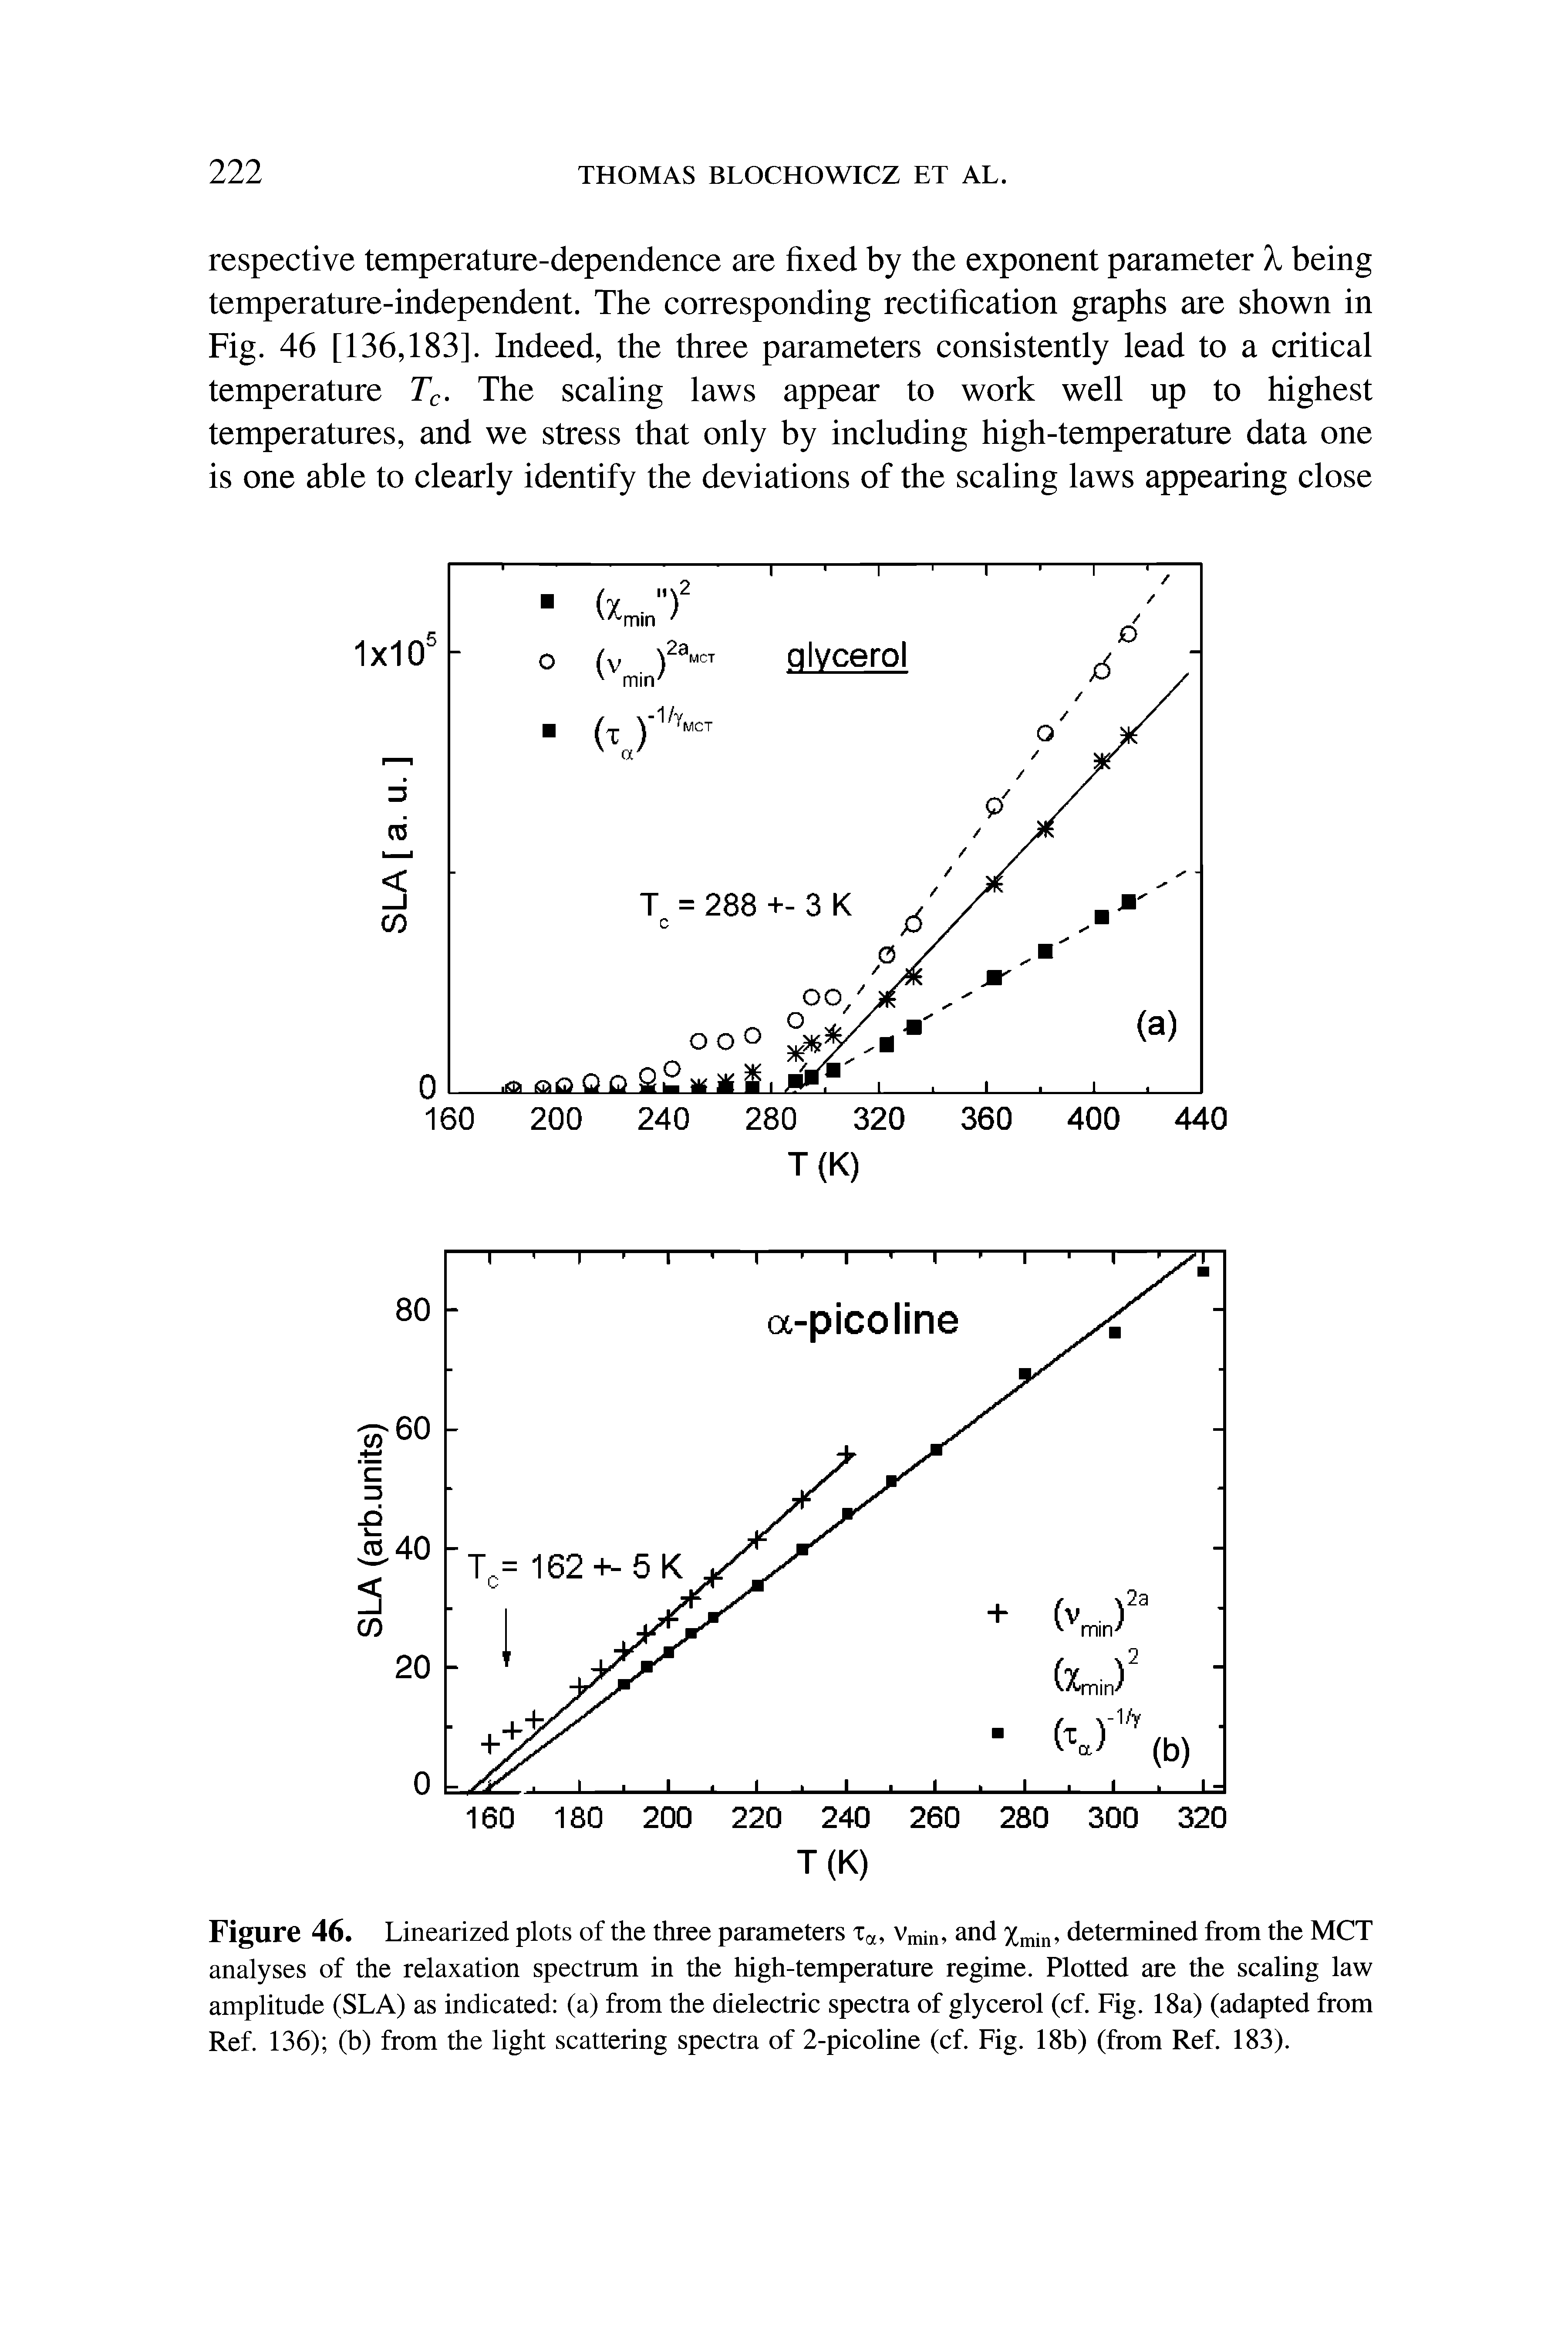 Figure 46. Linearized plots of the three parameters xa, vmin, and %min, determined from the MCT analyses of the relaxation spectrum in the high-temperature regime. Plotted are the scaling law amplitude (SLA) as indicated (a) from the dielectric spectra of glycerol (cf. Fig. 18a) (adapted from Ref. 136) (b) from the light scattering spectra of 2-picoline (cf. Fig. 18b) (from Ref. 183).